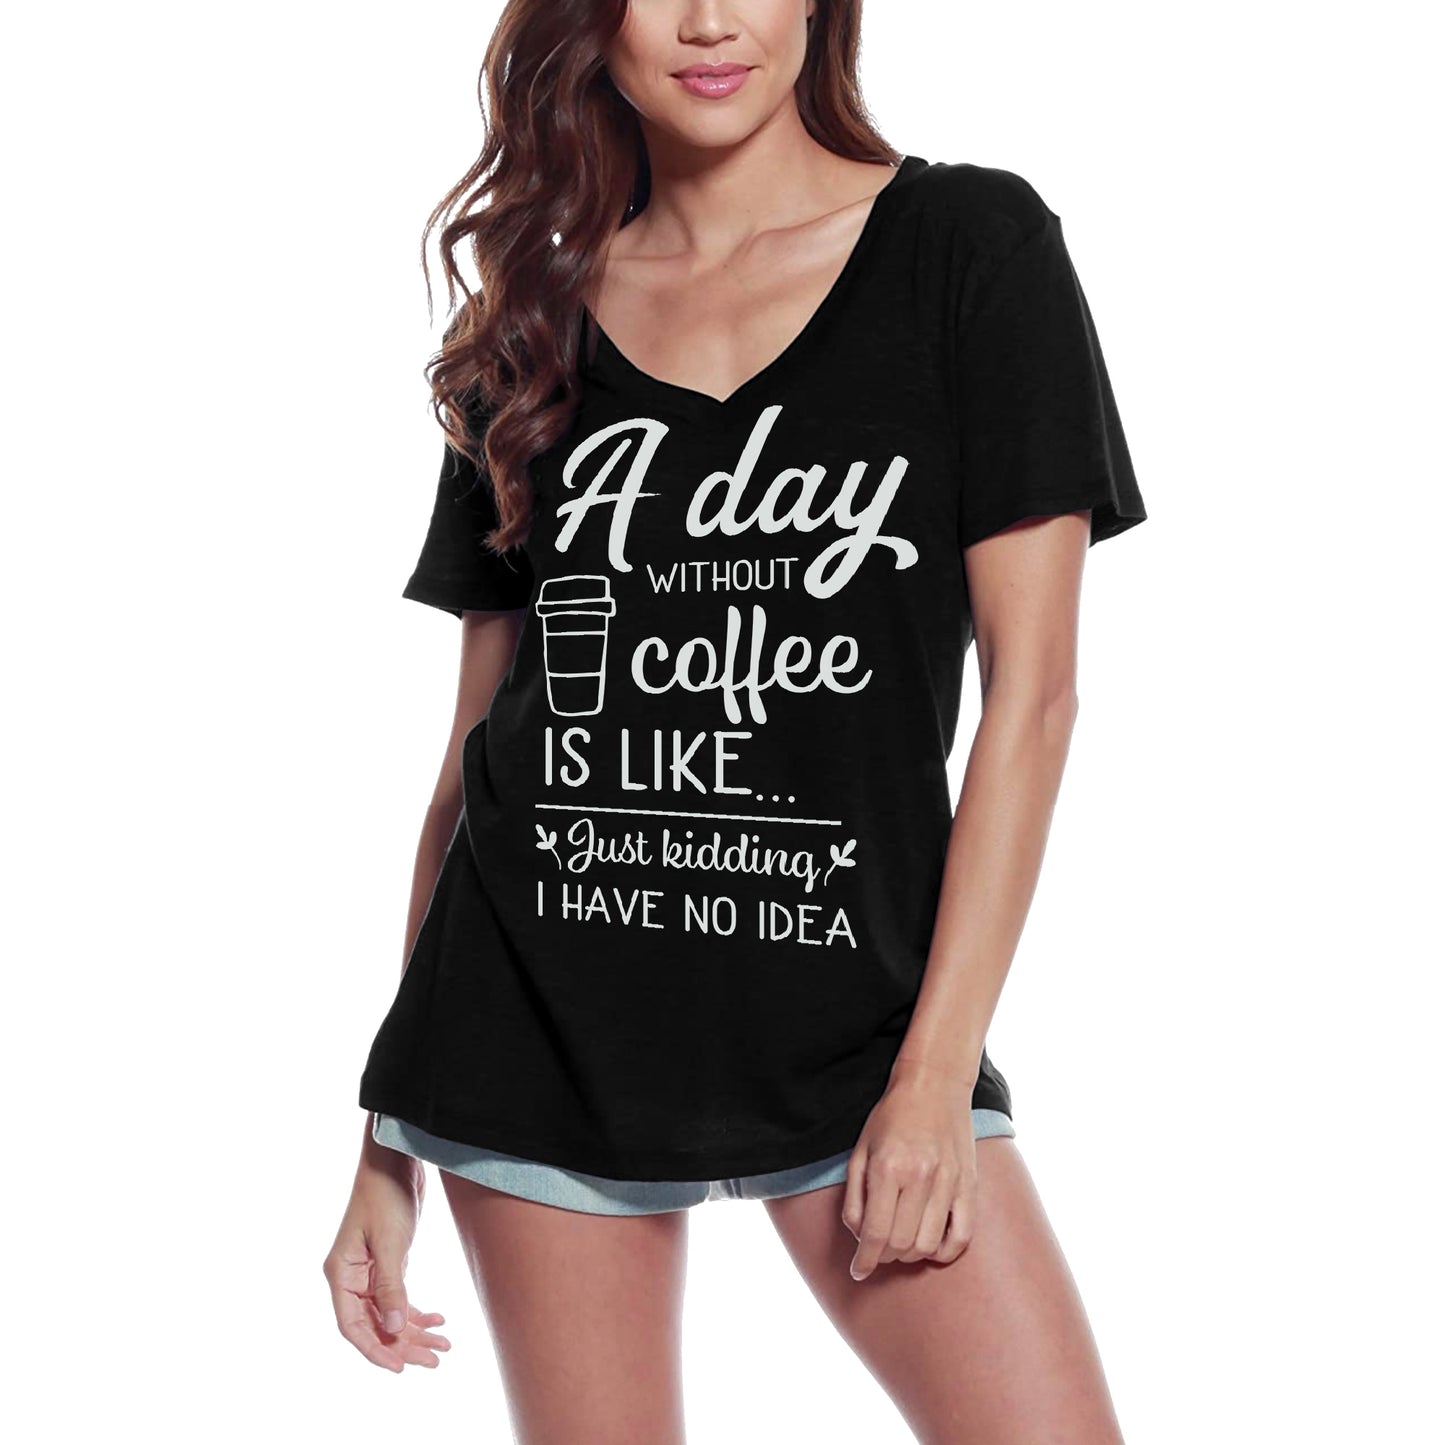 ULTRABASIC Damen T-Shirt A Day Without Coffee is Like – Lustige T-Shirt-Oberteile